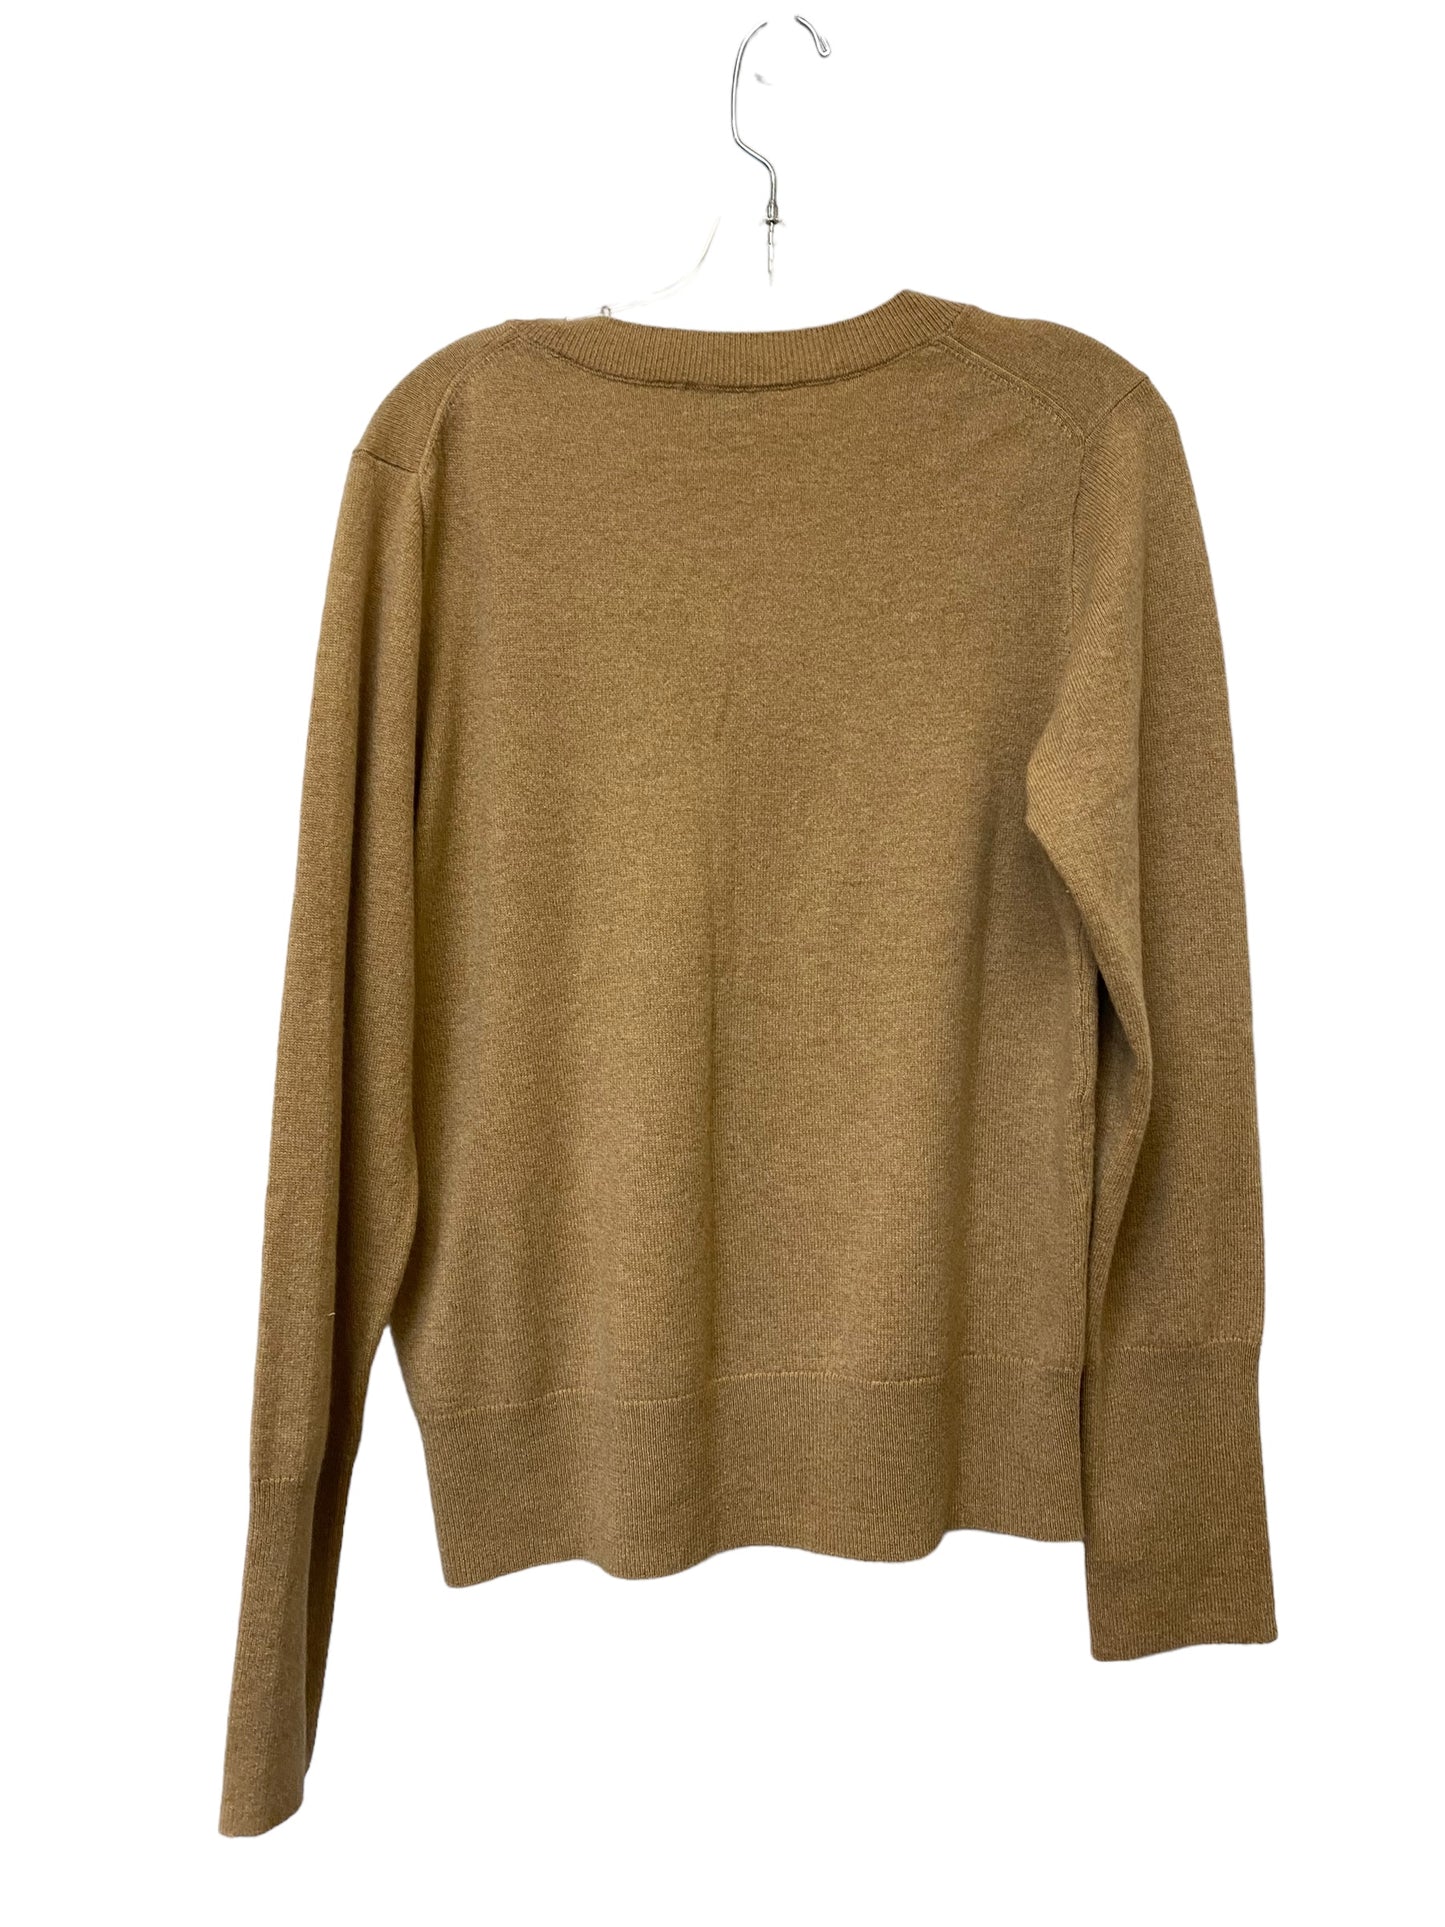 Sweater Cashmere By J. Crew  Size: Xl